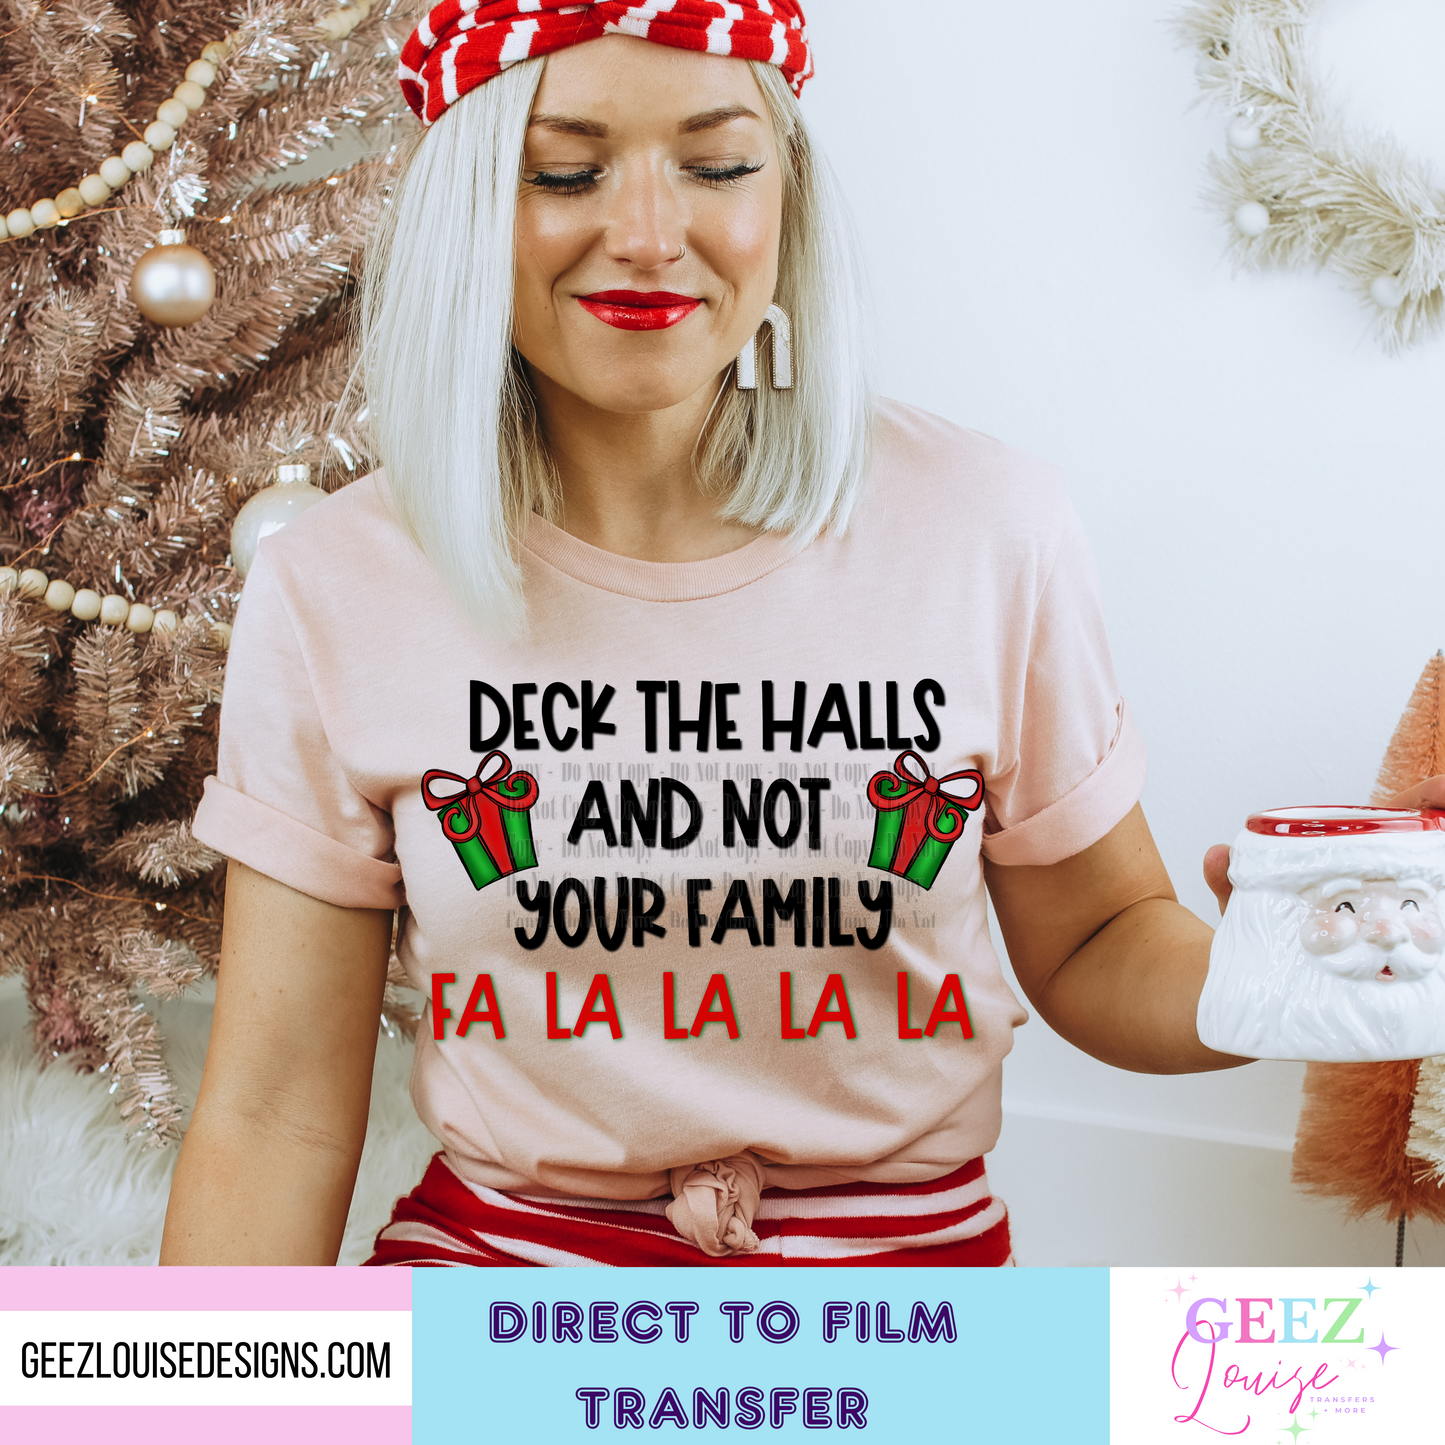 deck the halls and not your family - Direct to Film Transfer - made to order